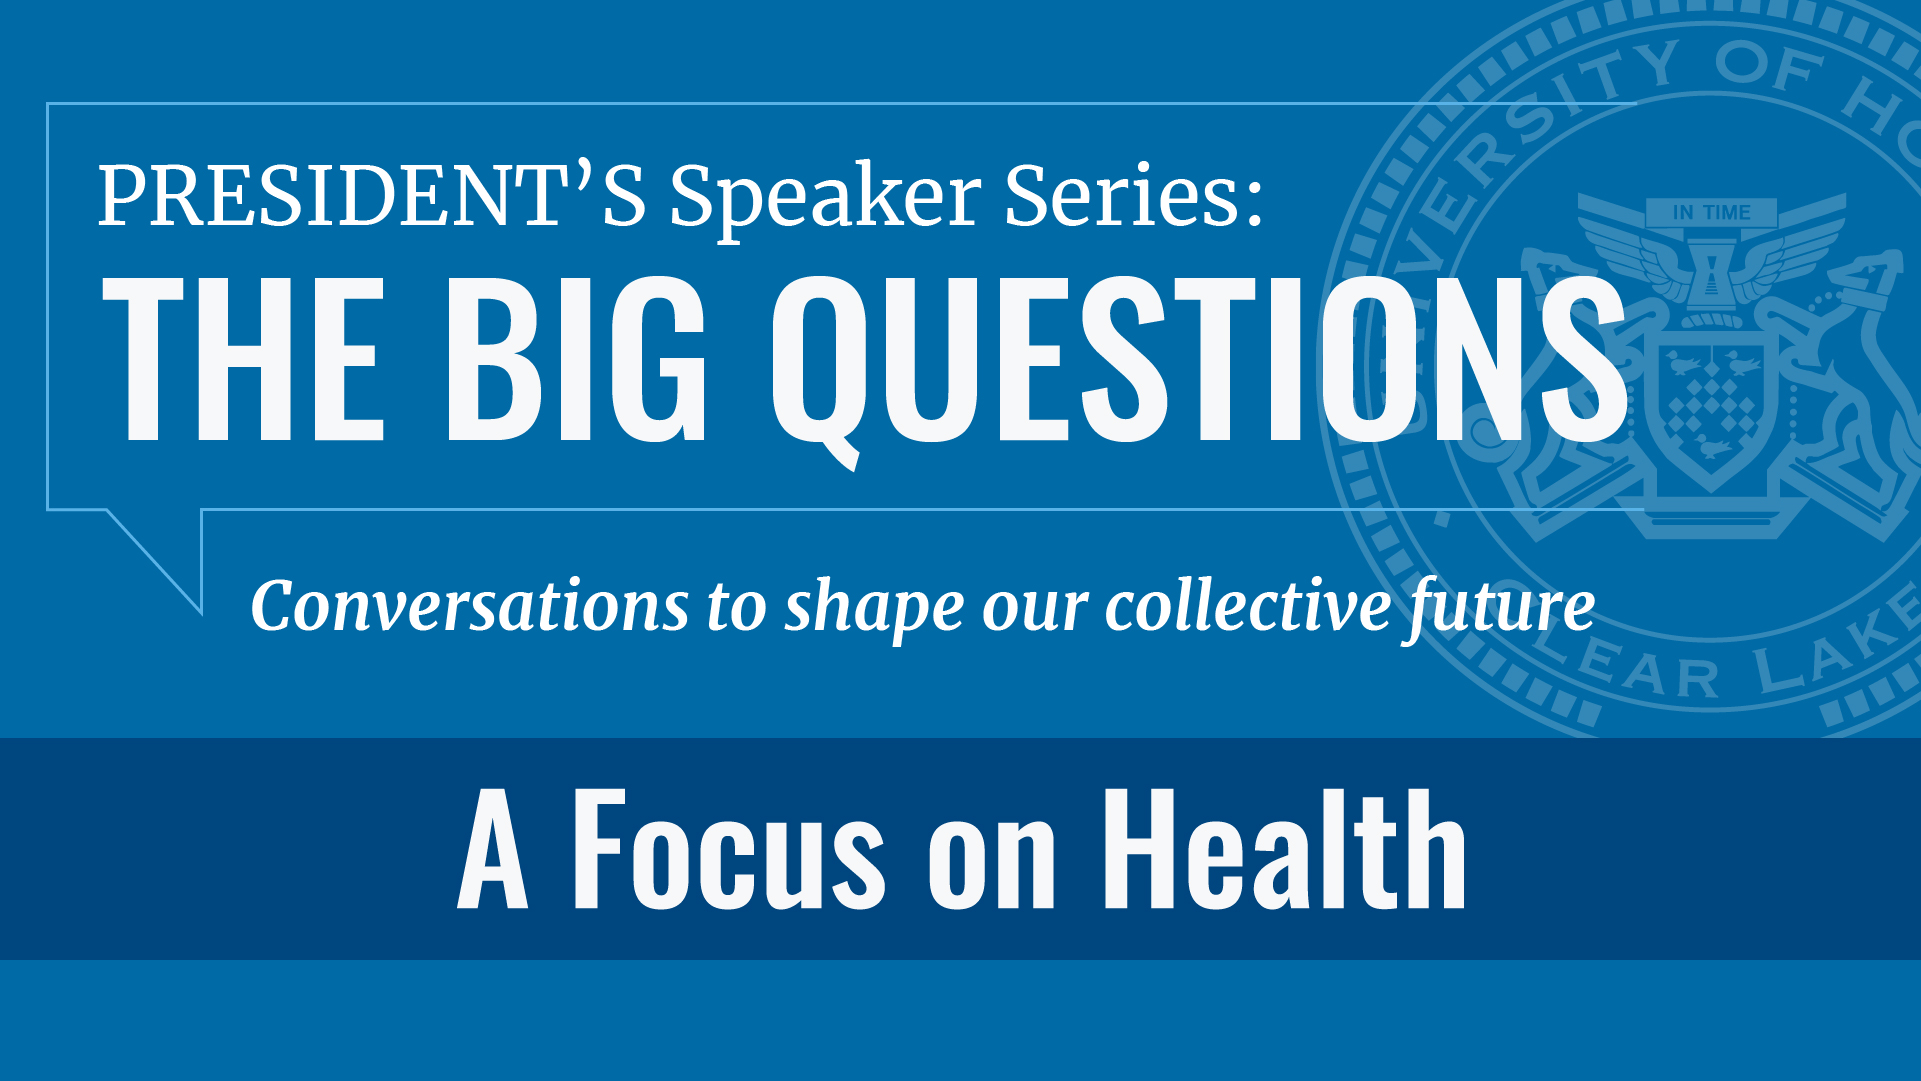 President's Speaker Series: The Big Questions, Conversations to shape our collective future. A Focus on Health